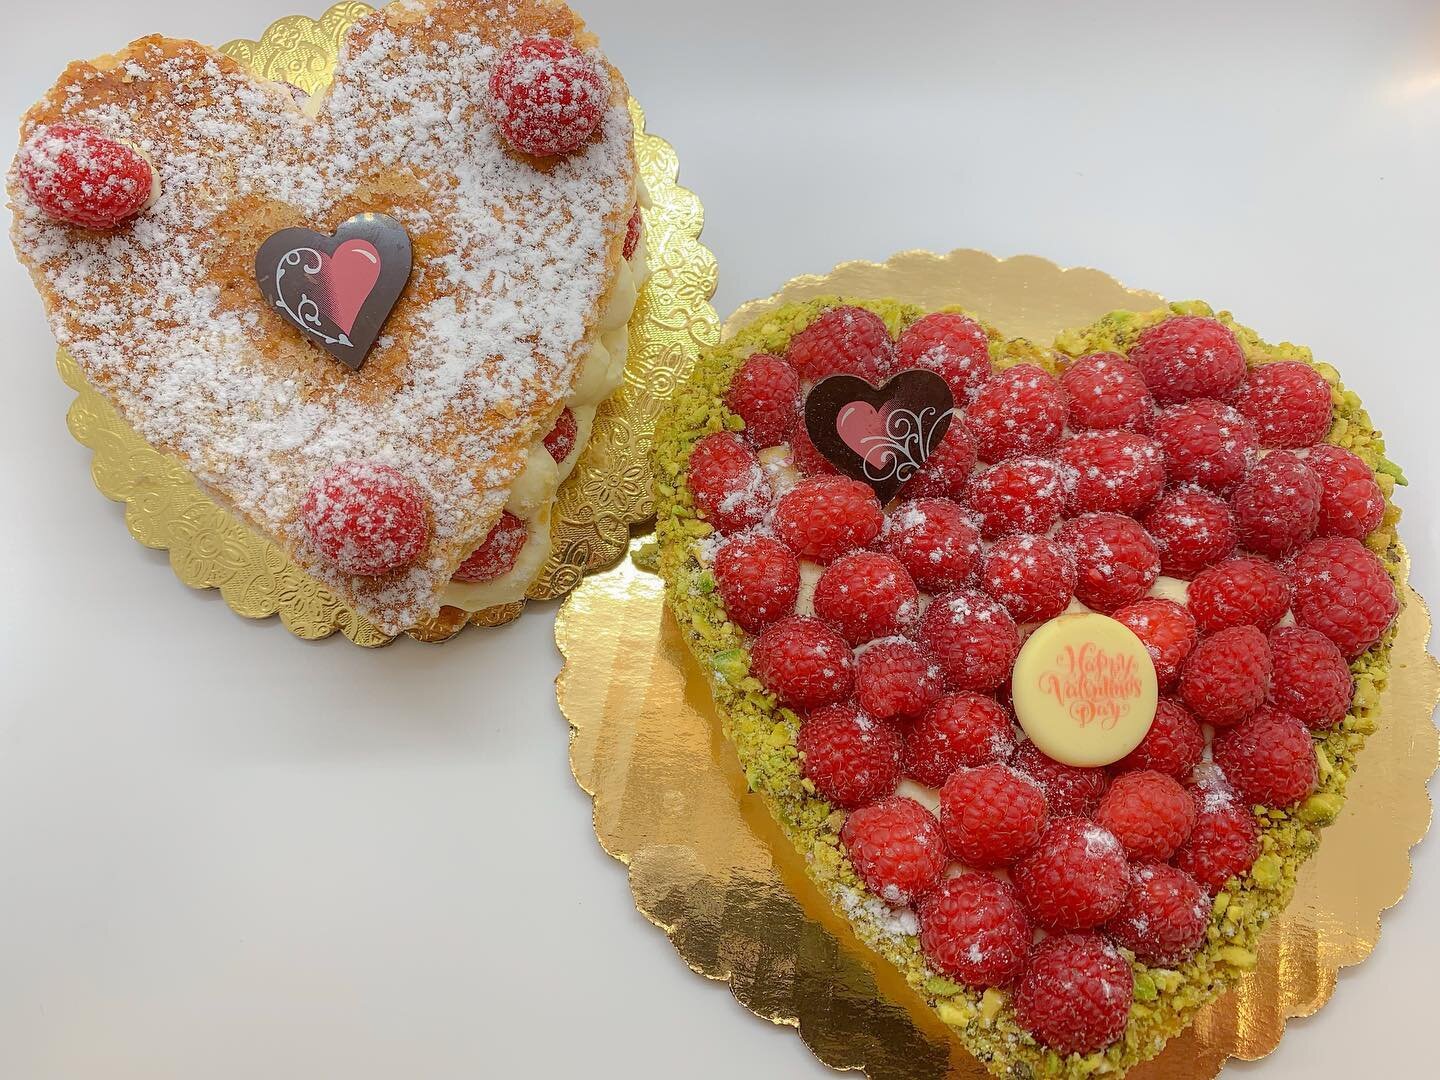 Our heart shaped raspberry mille feuille and our raspberry pistachio tartlette! ❤️❤️
.
.
.
.
.
#heartshapedtart #heartshapedpastry #heartshapeddessert #heart #pastry #dessert #raspberry #millefeuille #cake #bakery #cafe #bakeryandcafe #slcbakery #slc